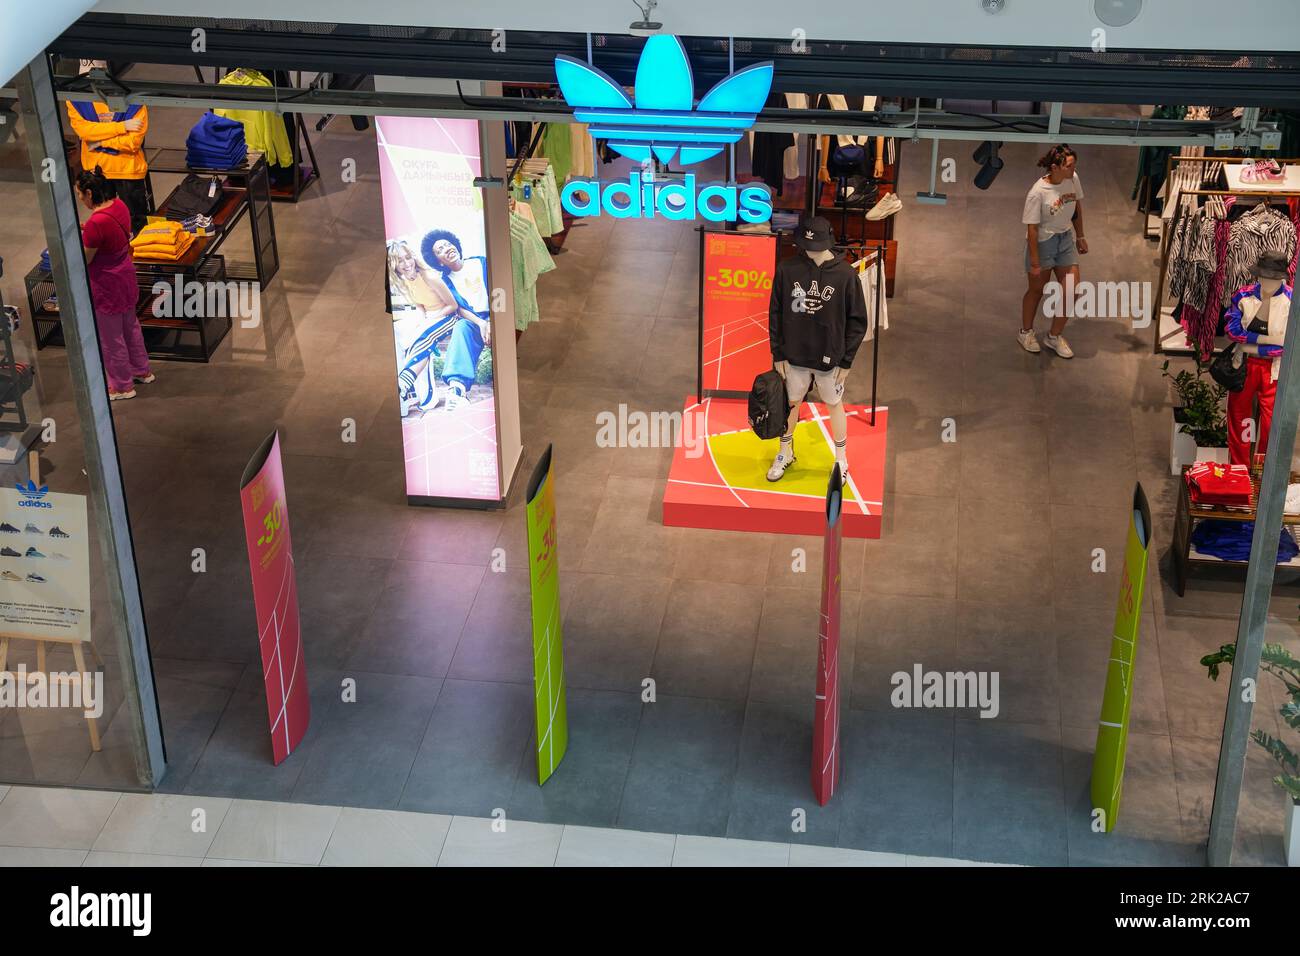 Almaty, Kazakhstan - August 17, 2023: Adidas retail store in a shopping mall. Footwear brand Stock Photo